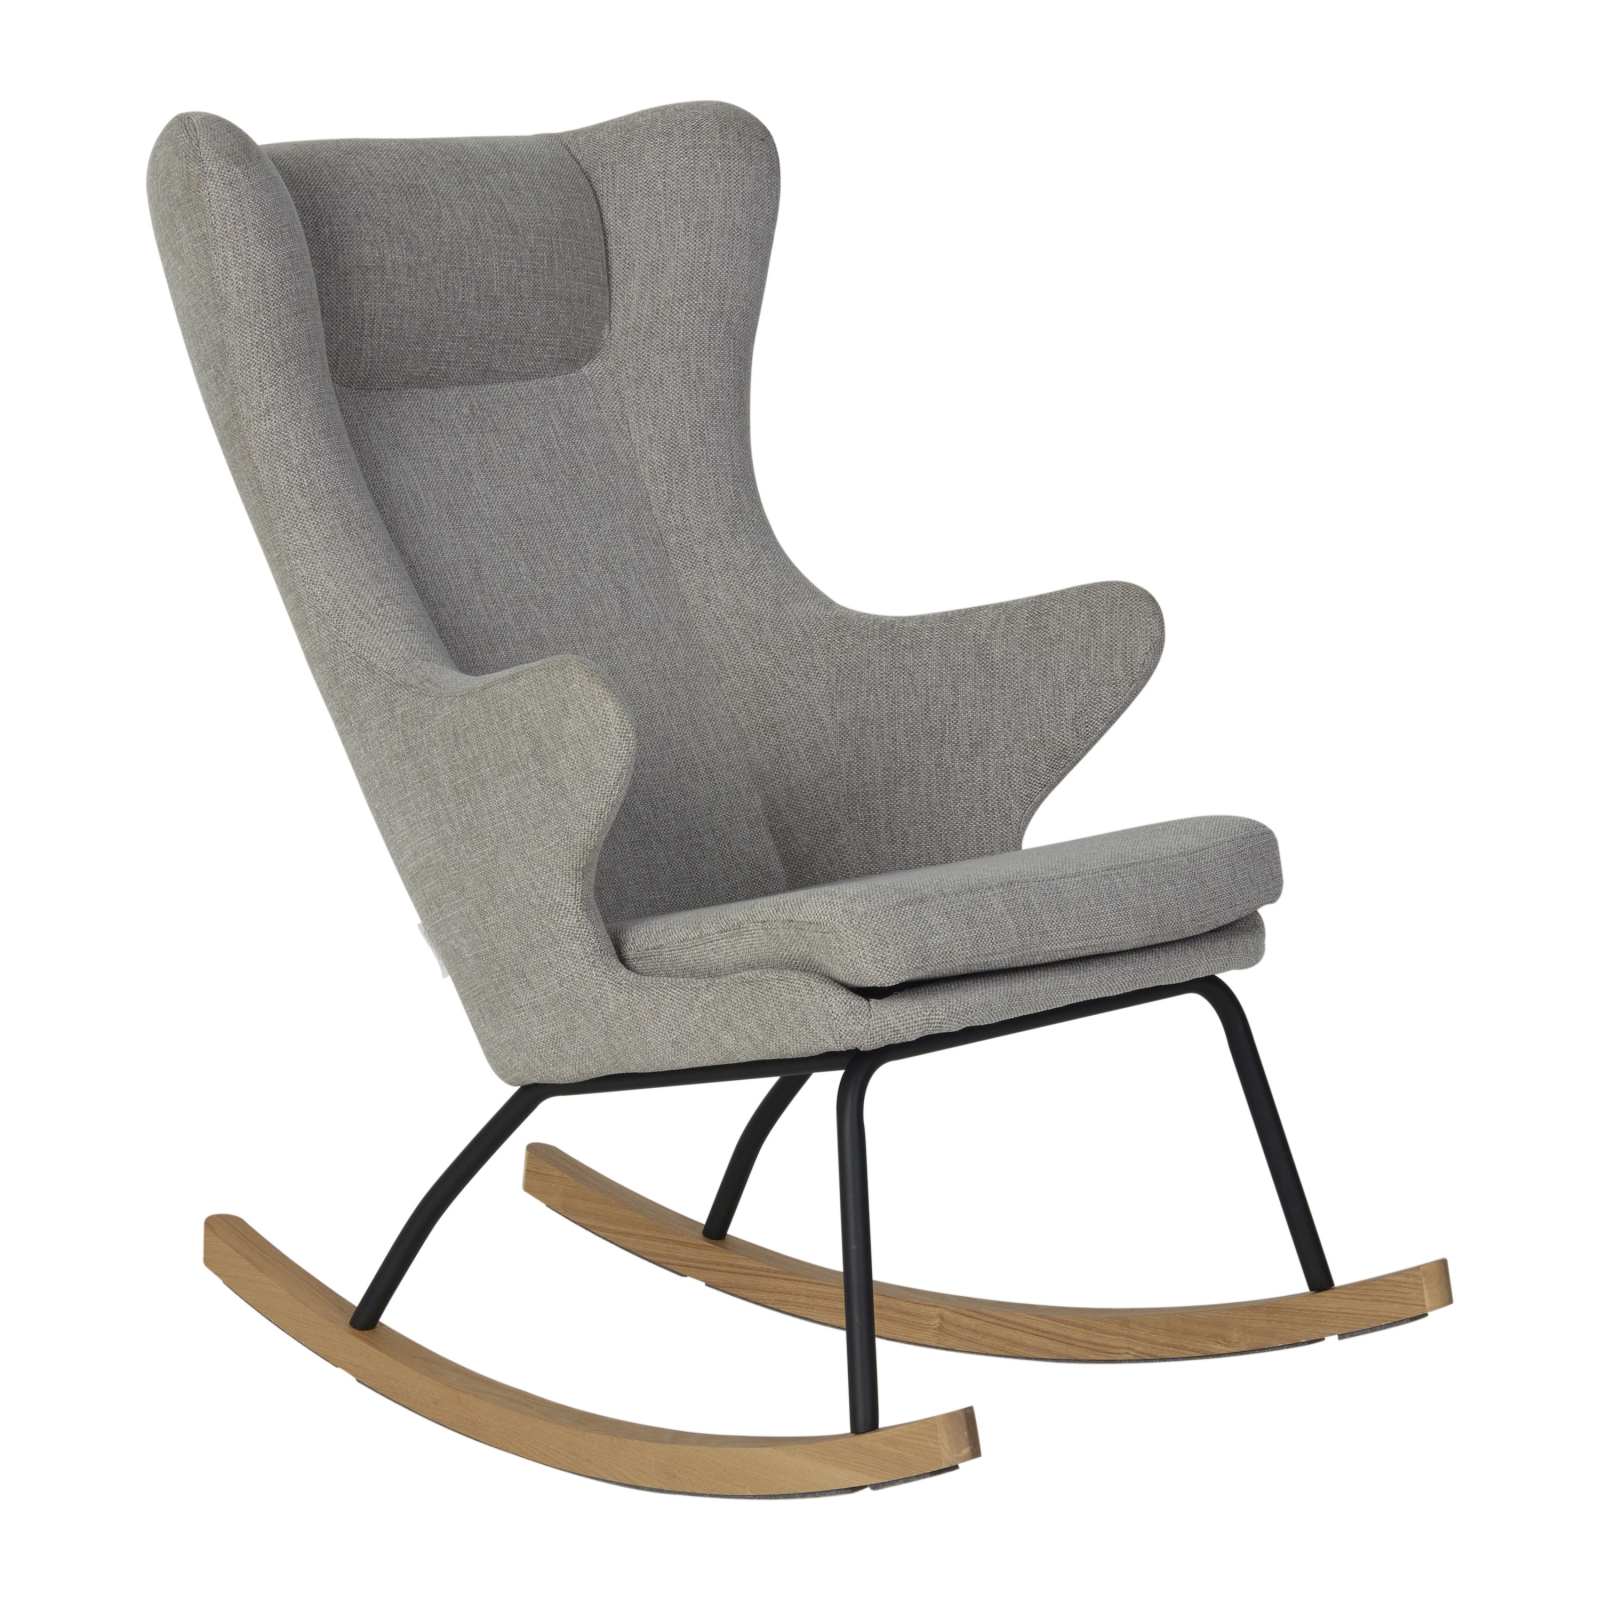 Order the Quax Rocking Adult Chair De Luxe online - Baby